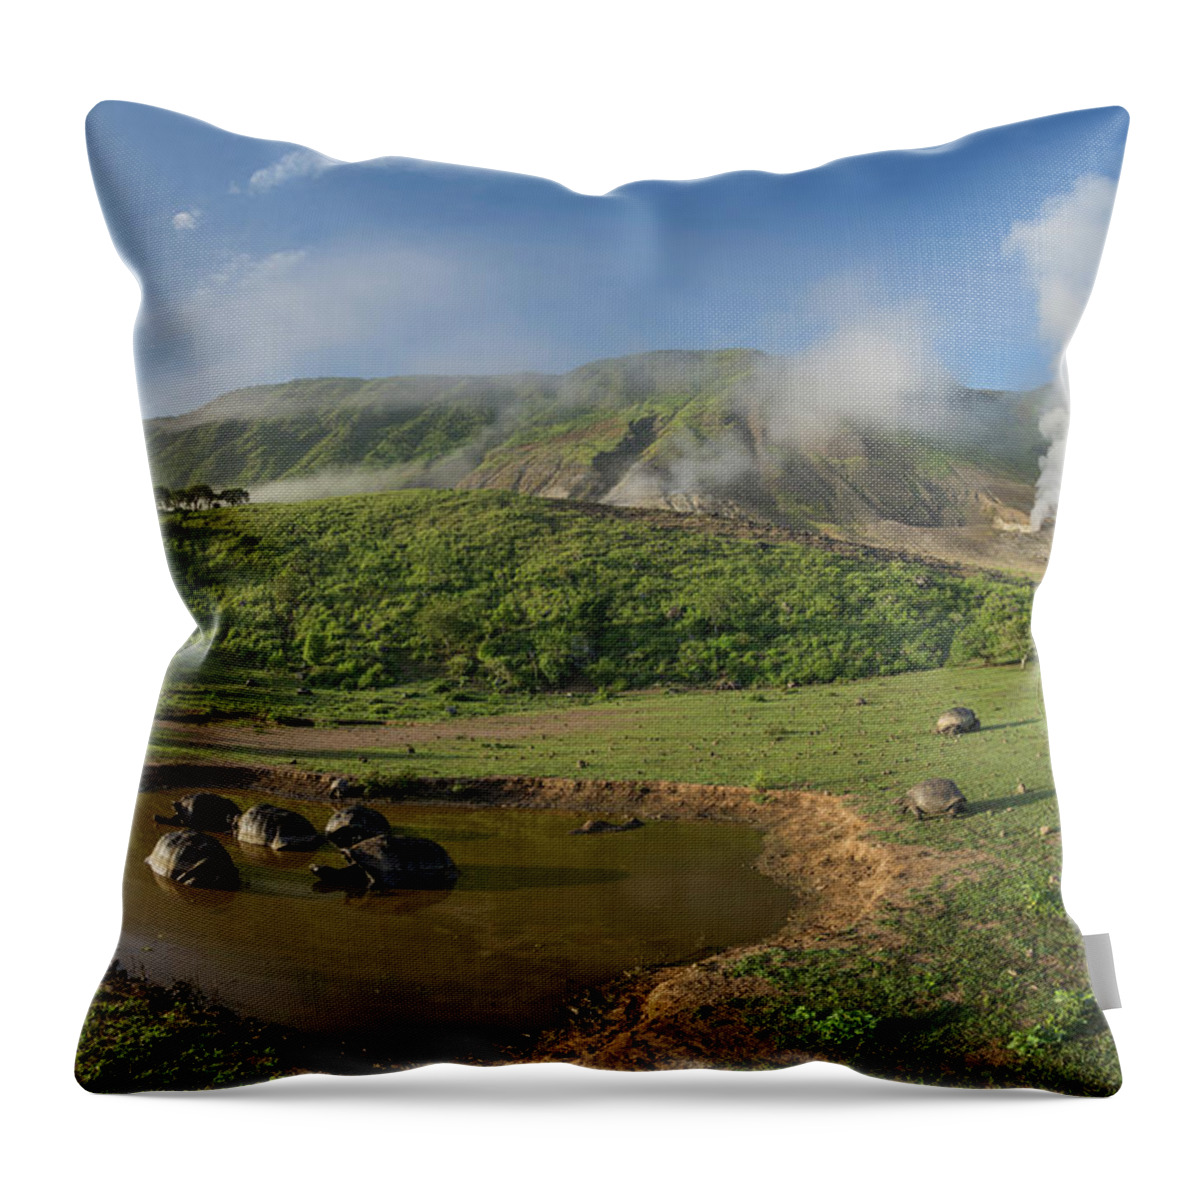 Animal Throw Pillow featuring the photograph Volcan Alcedo Tortoises In Wallow by Tui De Roy